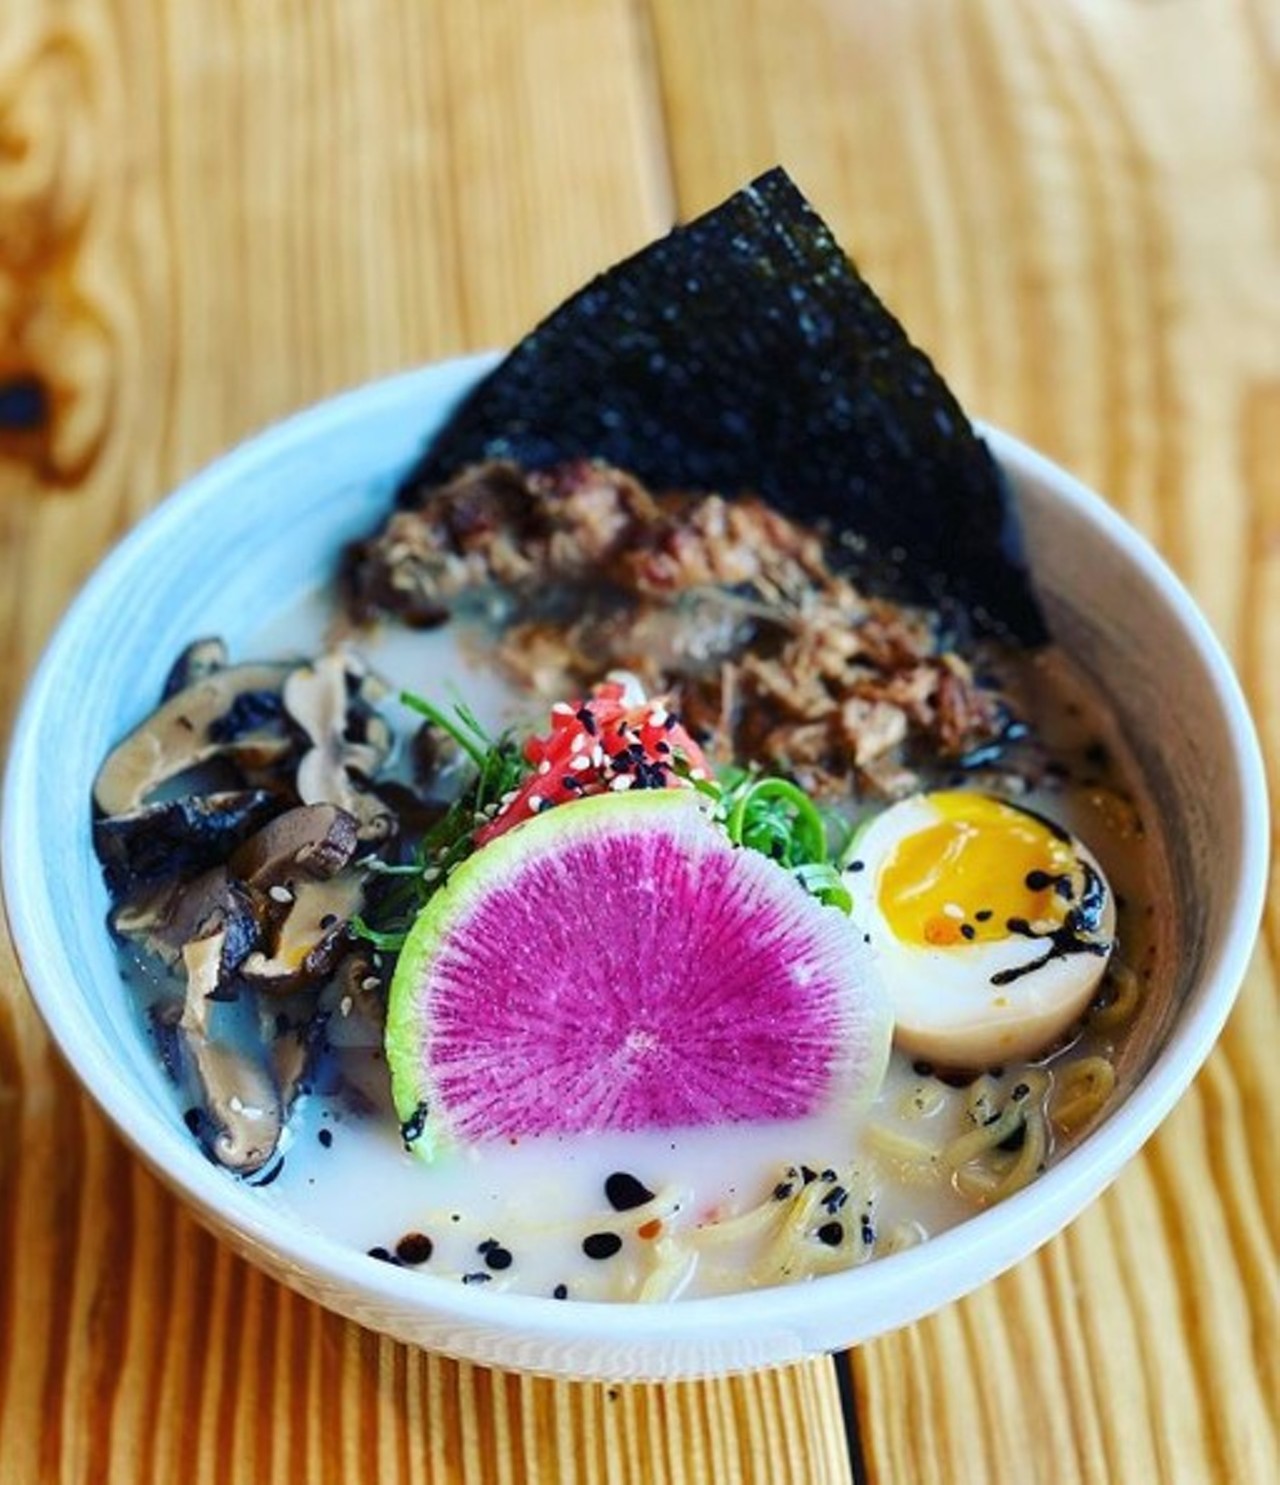 Noodle Tree
7114 UTSA Boulevard, Suite 101, (210) 233-6371, noodletreetx.com
A new twist on ramen noodles. Pickup and delivery within an eight mile radius is available for all your noodly cravings. 
Photo via Instagram  
noodletreetx